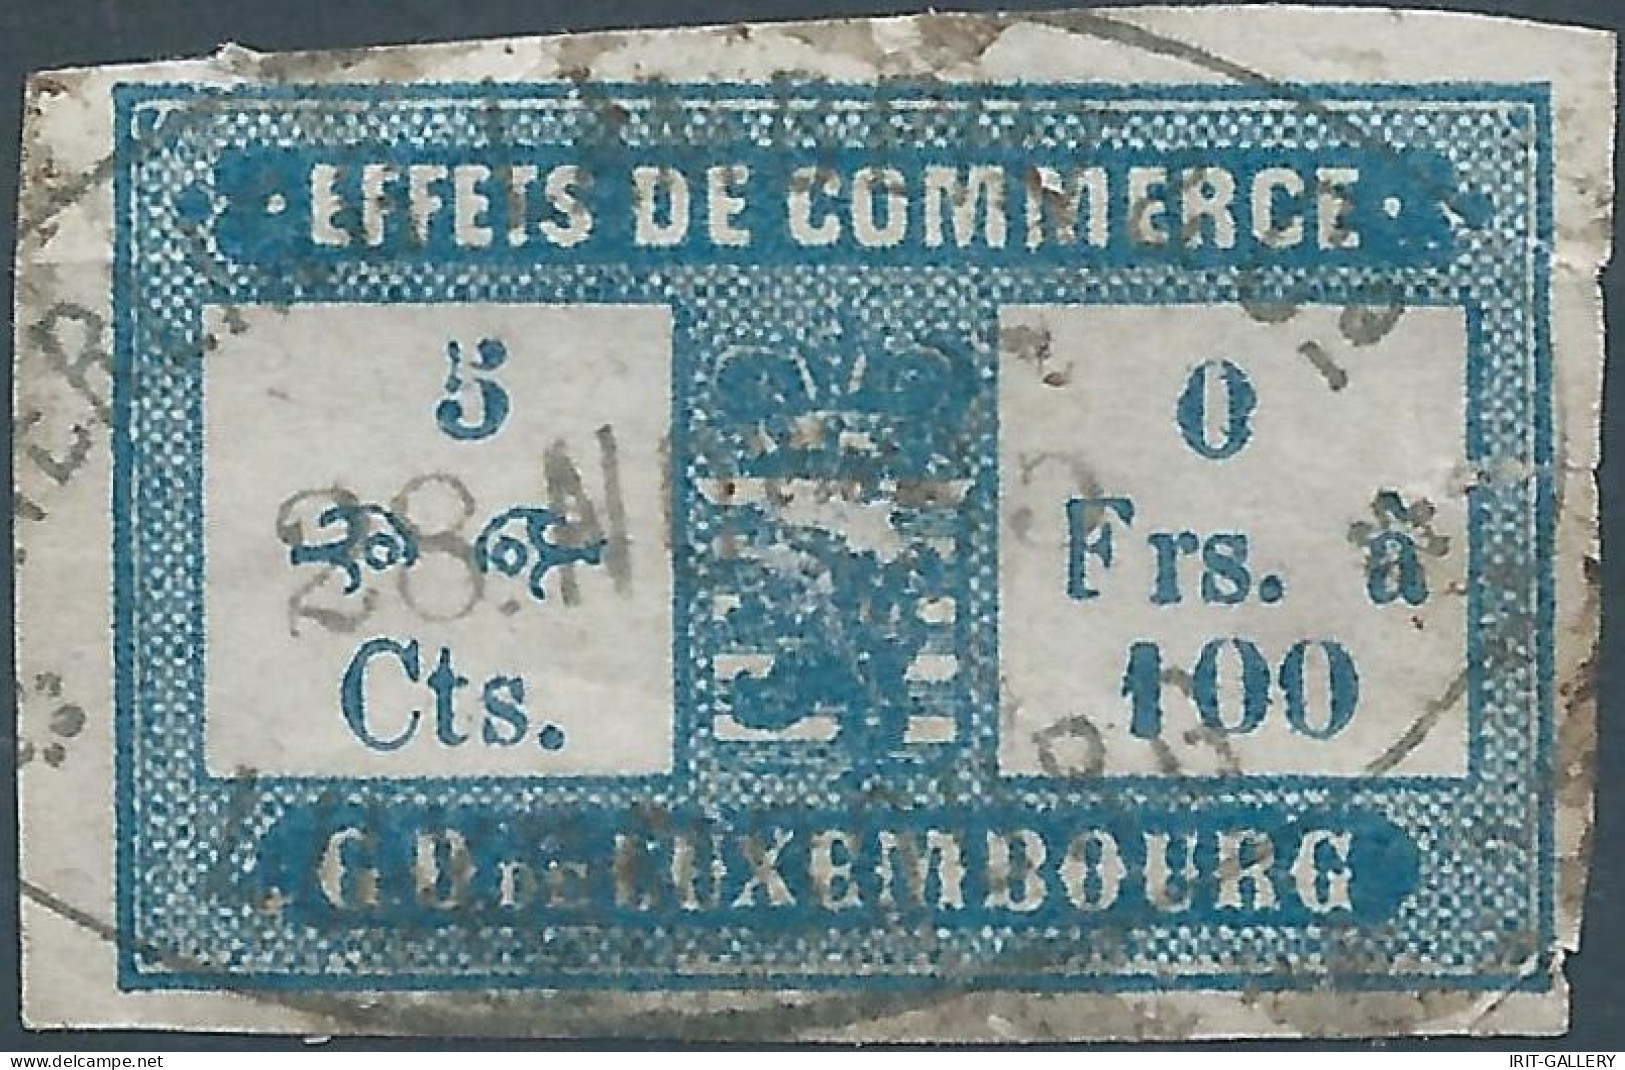 Lussemburgo - G.D De LUXEMBOURG,1885 Revenue Stamp Tax Fiscal , EFFETS DE COMMERCE-TRADING EFFECTS , Very Old - Fiscali